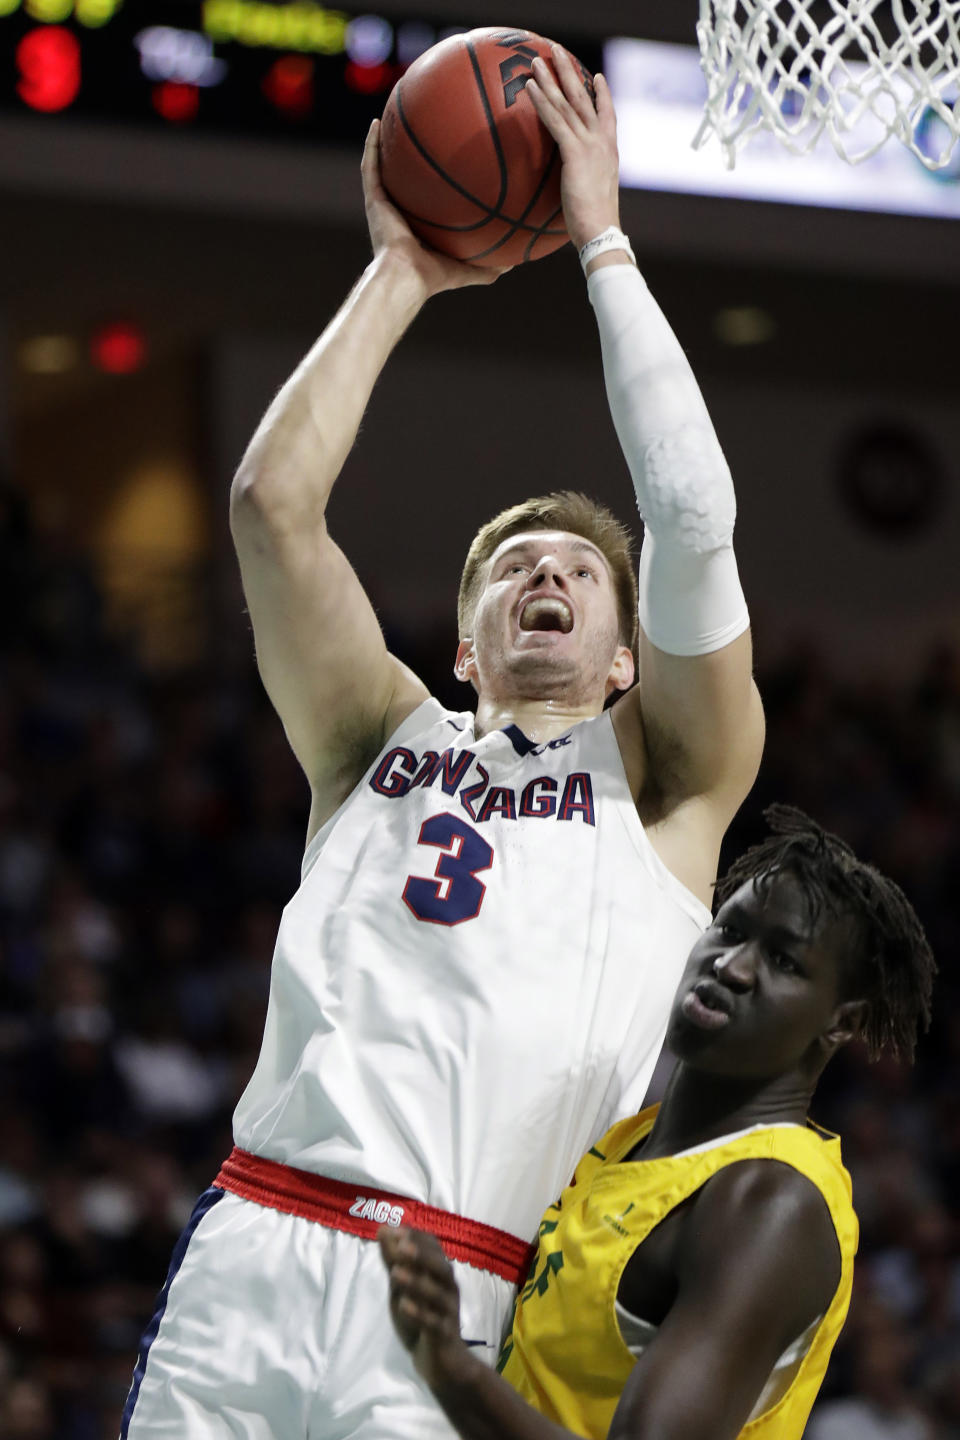 Gonzaga's Filip Petrusev (3) shoos as San Francisco's Josh Kunen defends during the first half of an NCAA college basketball game in the West Coast Conference men's tournament Monday, March 9, 2020, in Las Vegas. (AP Photo/Isaac Brekken)